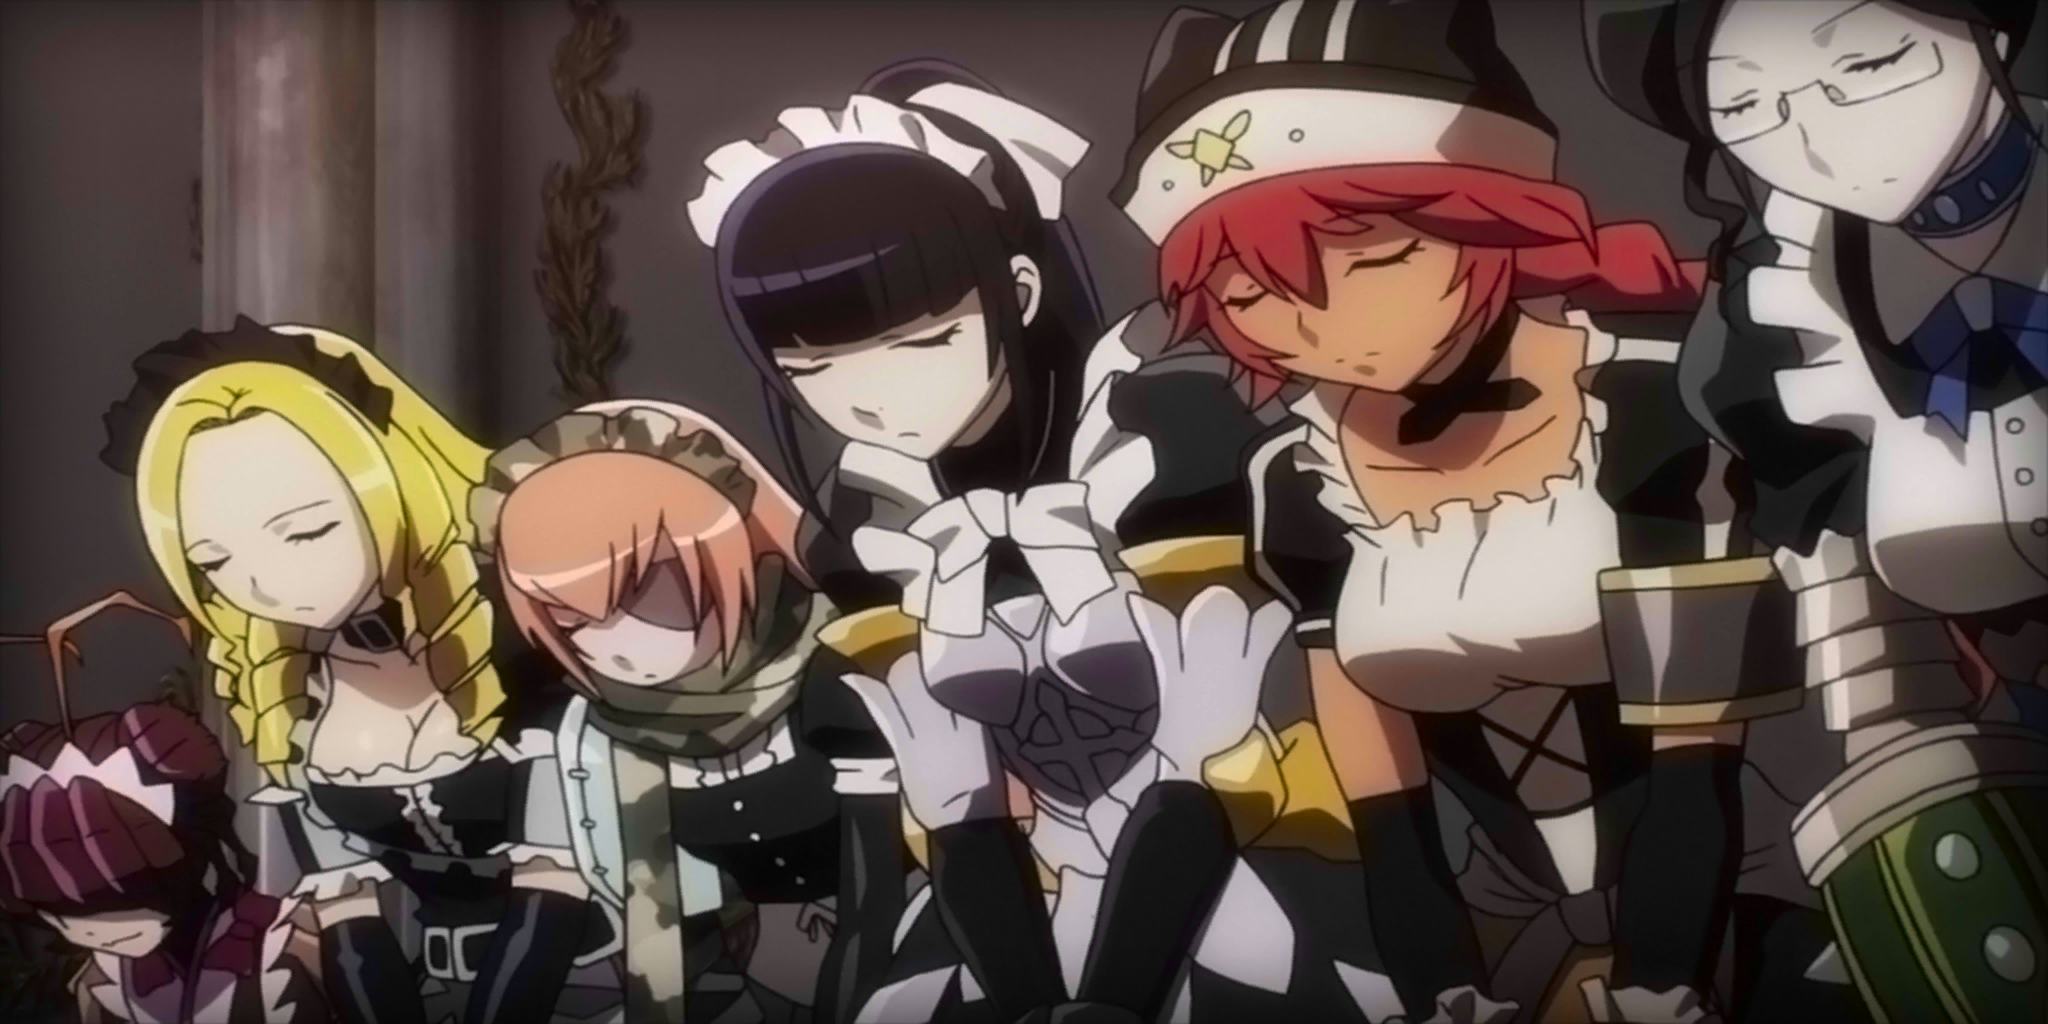 Maid Uniform is a Weapon